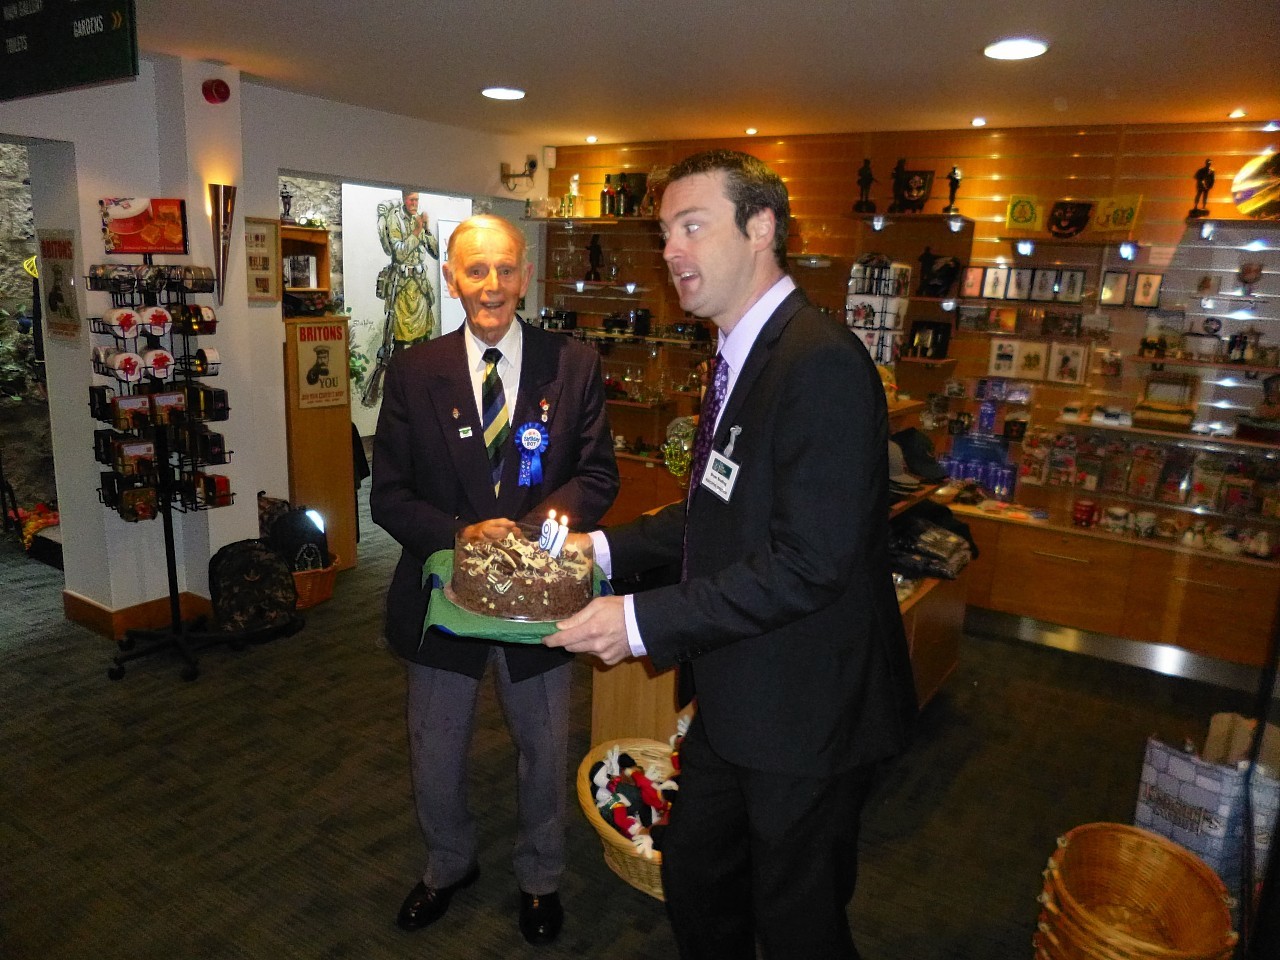 Jim Glennie receives his 90th birthday cake from museum executive director, Bryan Snelling.